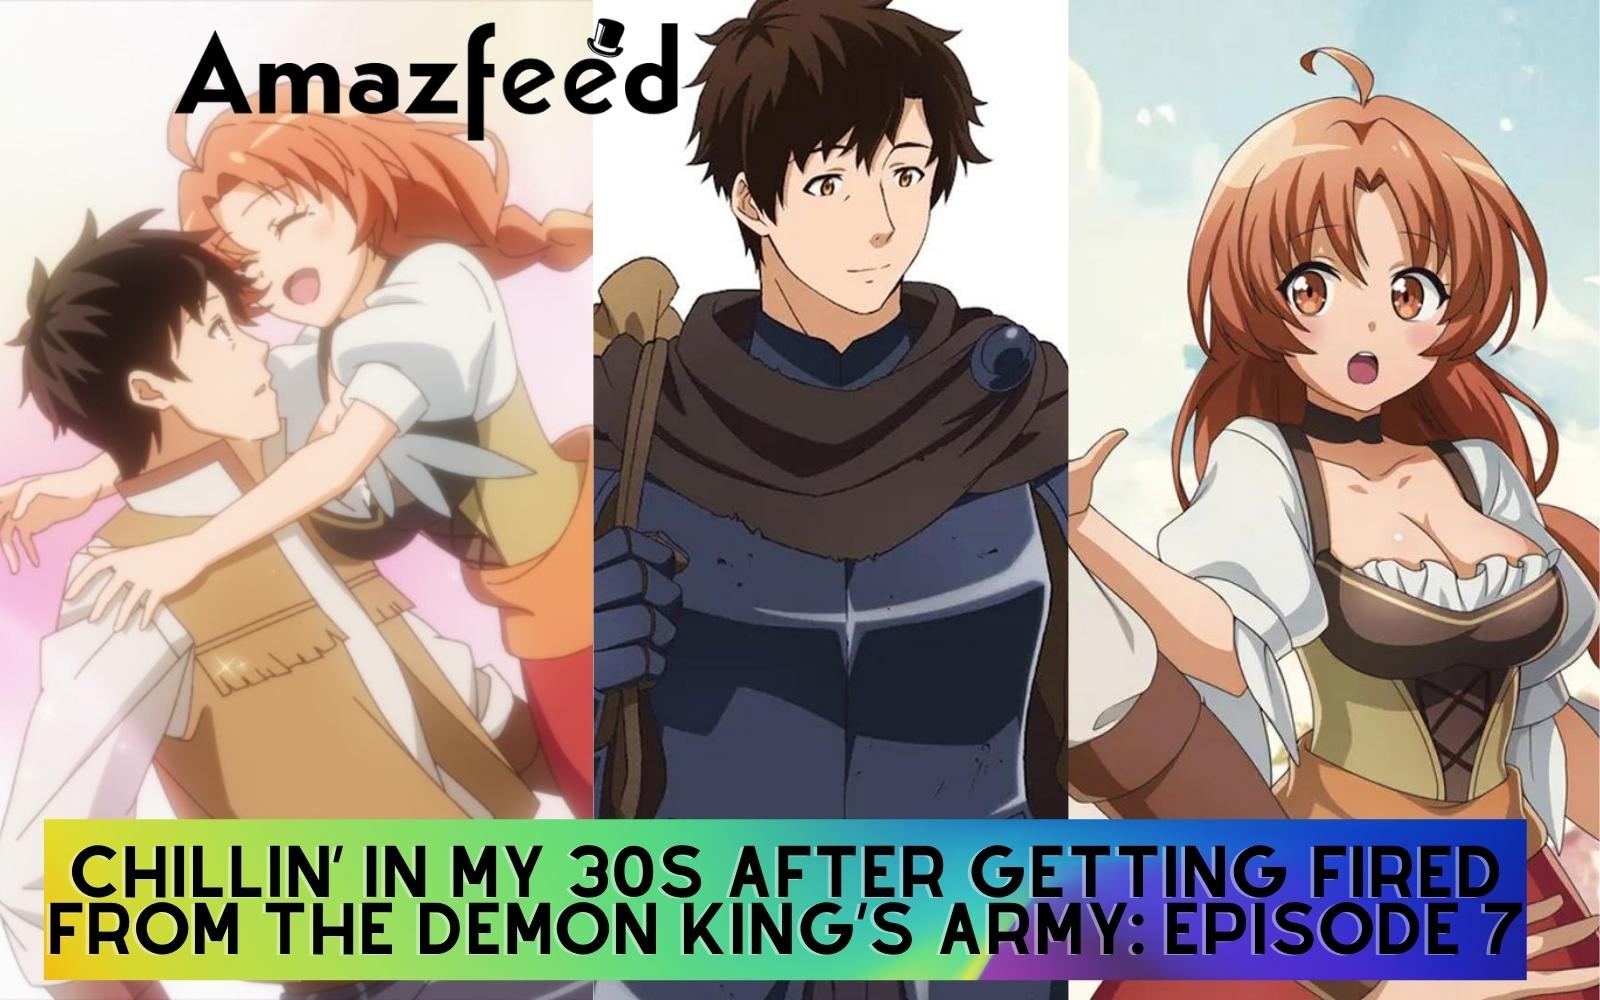 Chillin' in My 30s After Getting Fired from the Demon King's Army Episode 9  - Preview Trailer 